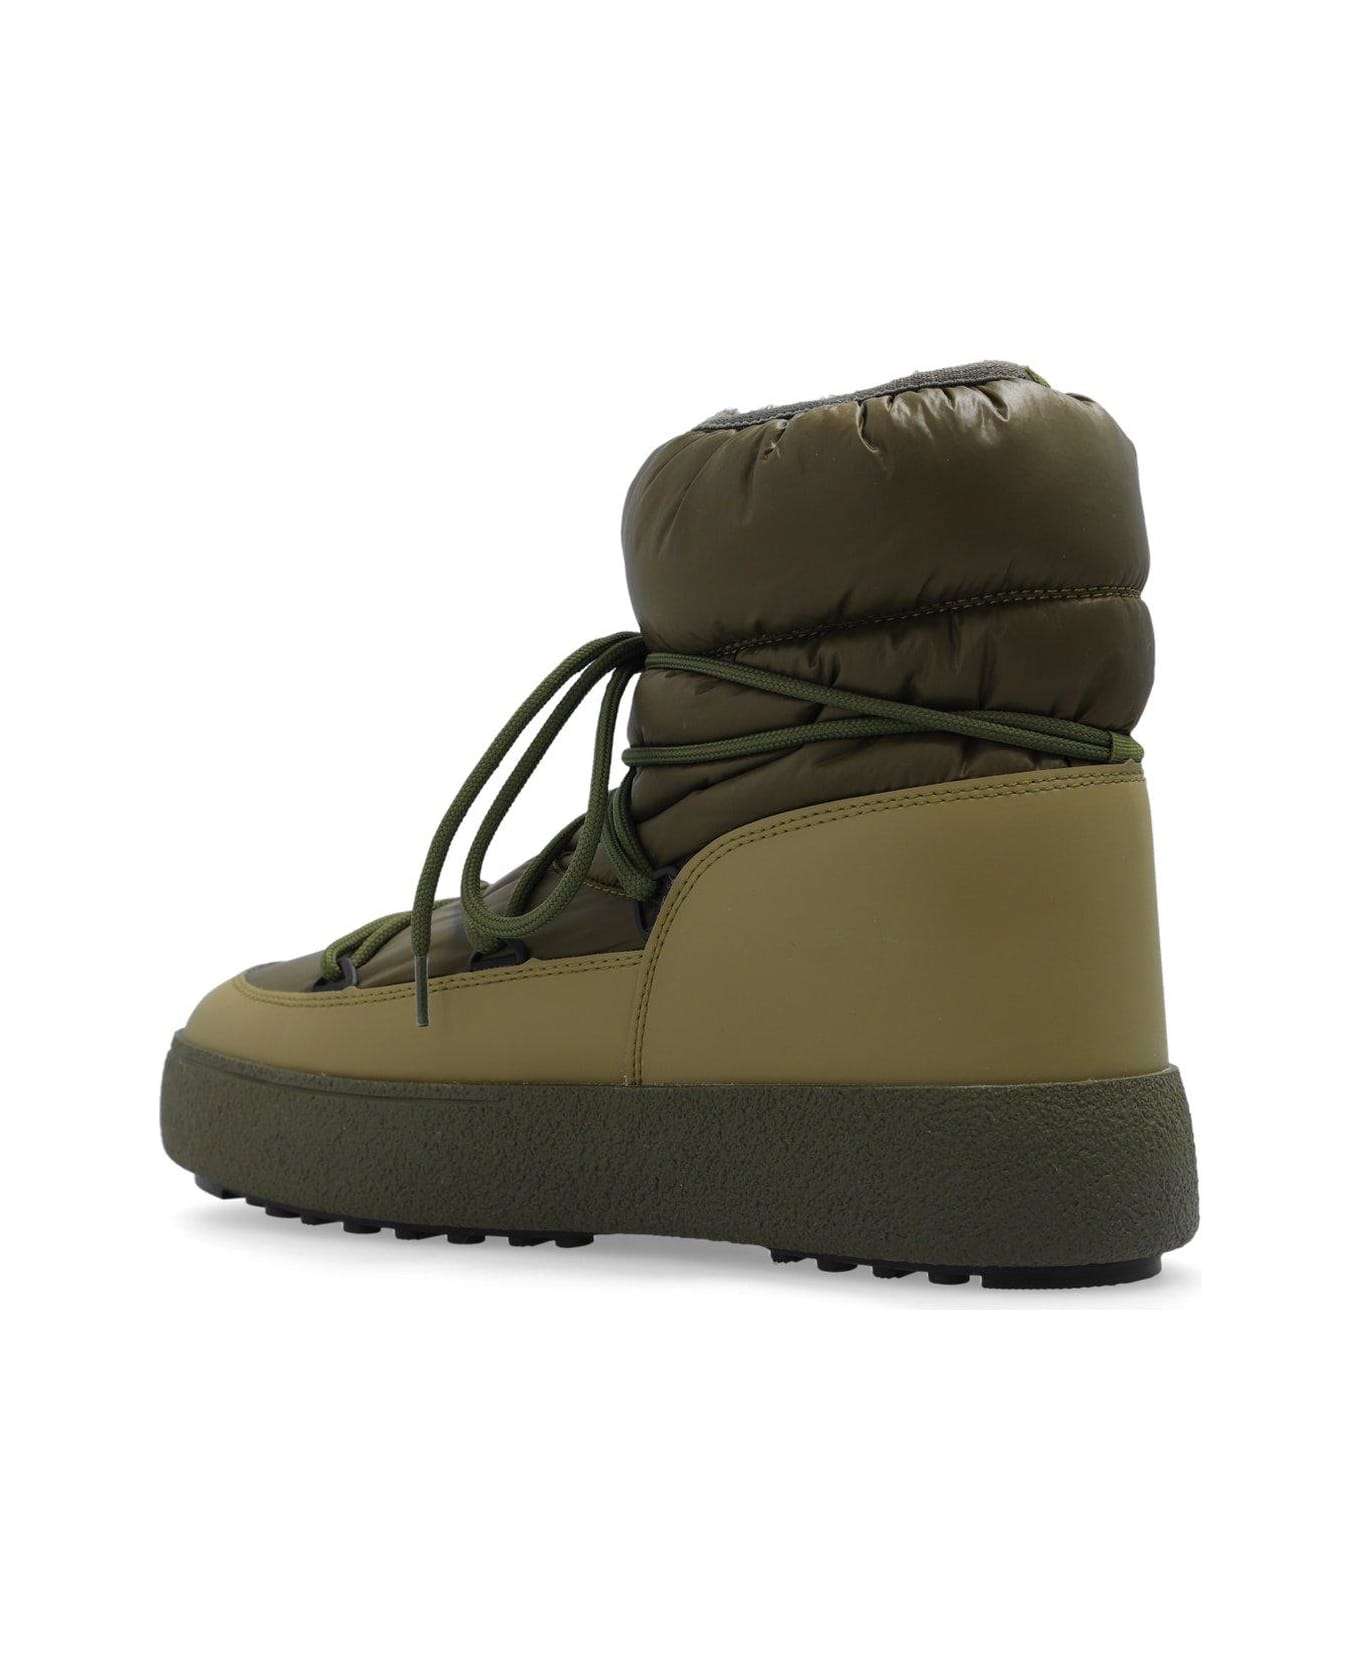 Moon Boot Mtrack Low Padded Boots - Verde ブーツ